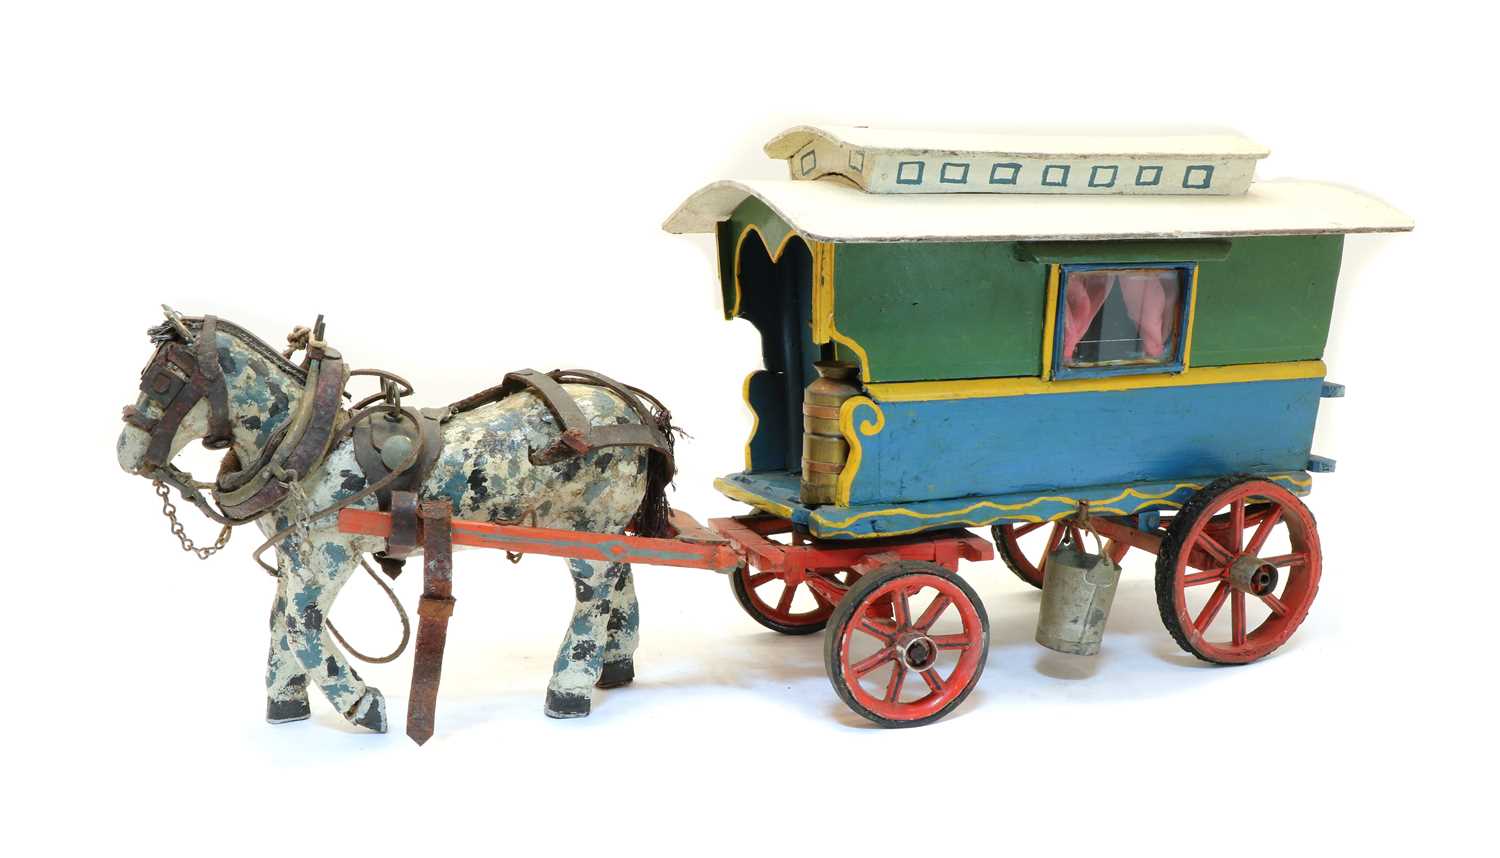 Lot 55 - A painted wooden model of a gypsy caravan and horse